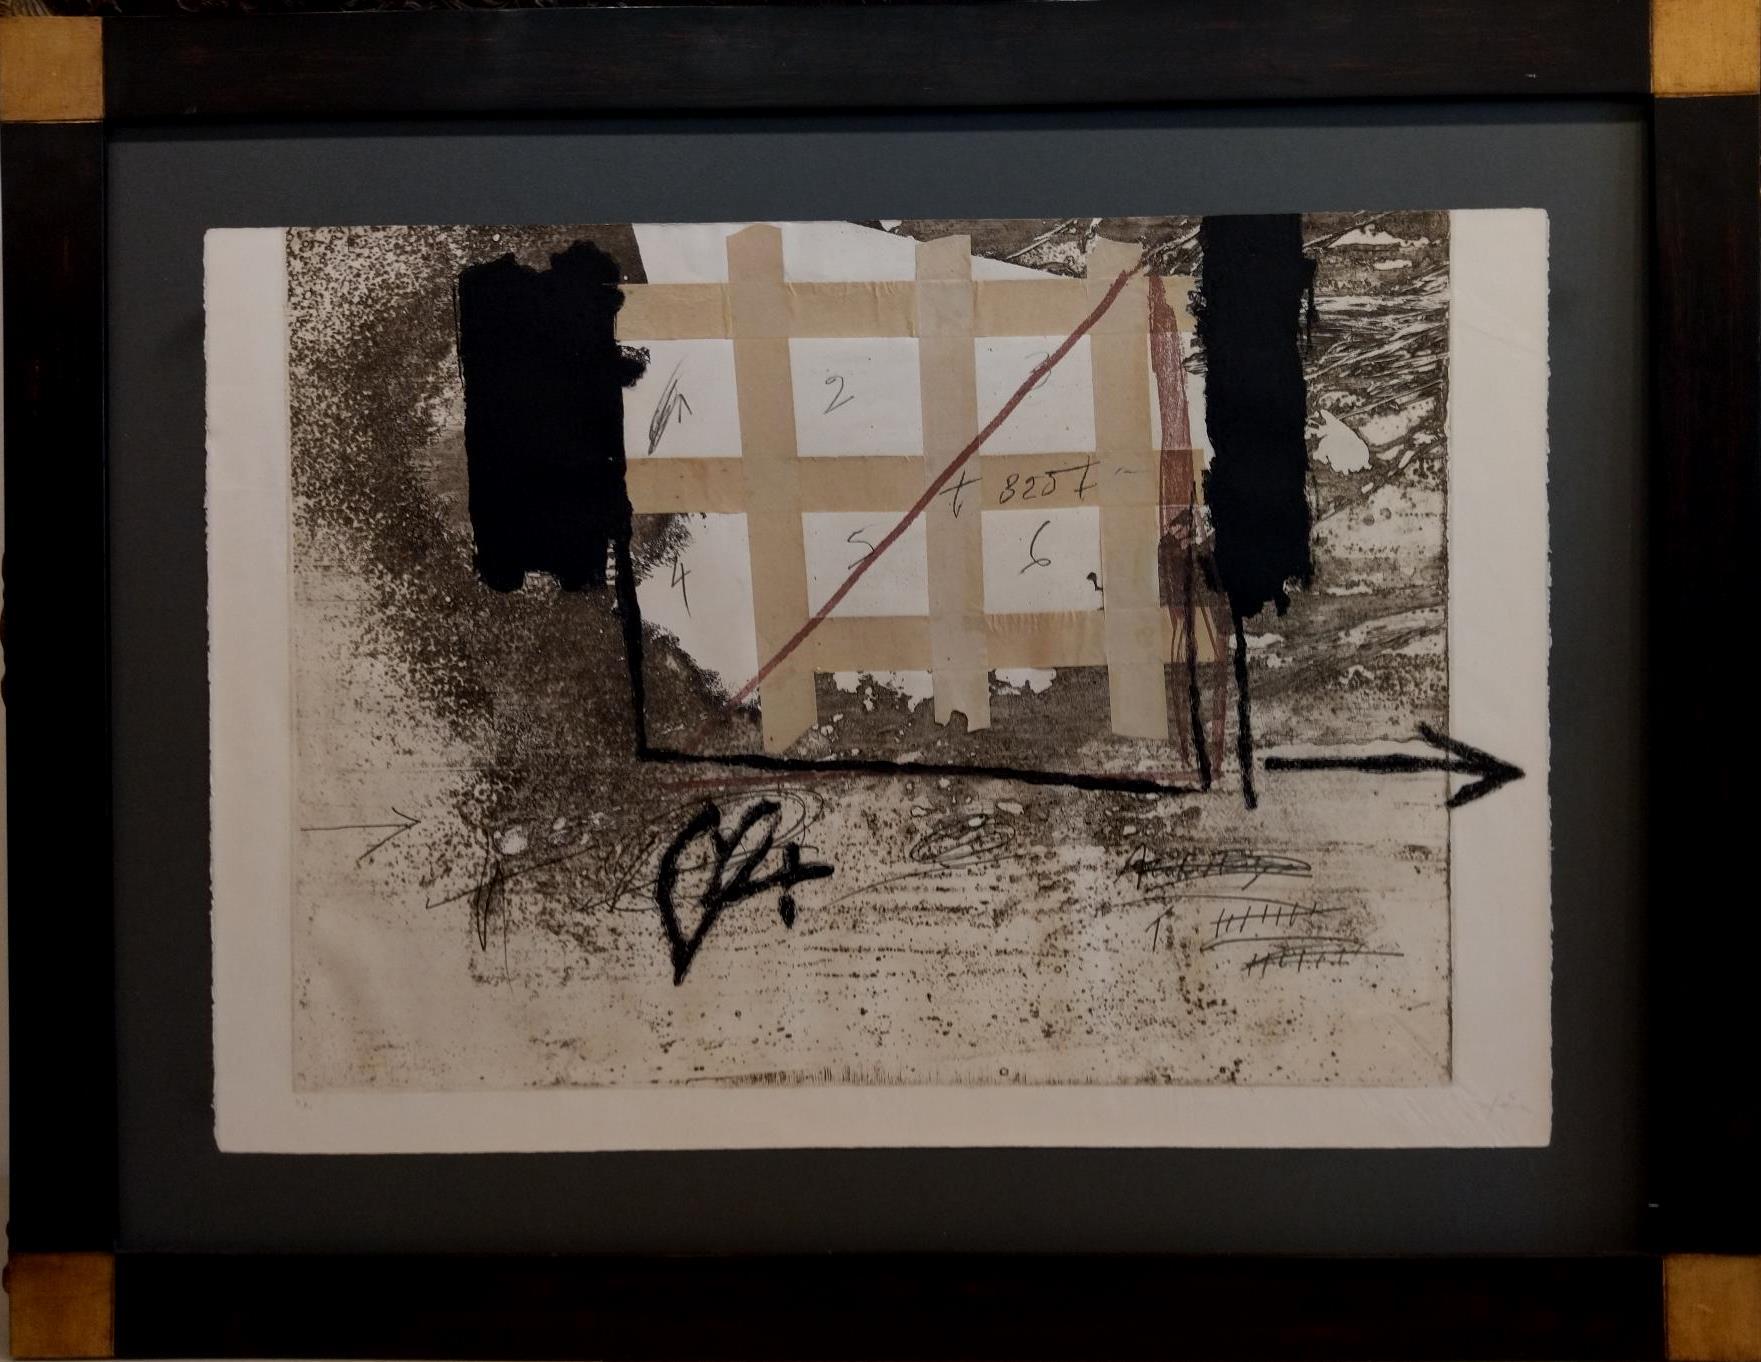  Tapies  50 Engraved With Plastic Collage and Polychrome stamping abstract  - Print by Antoni Tàpies